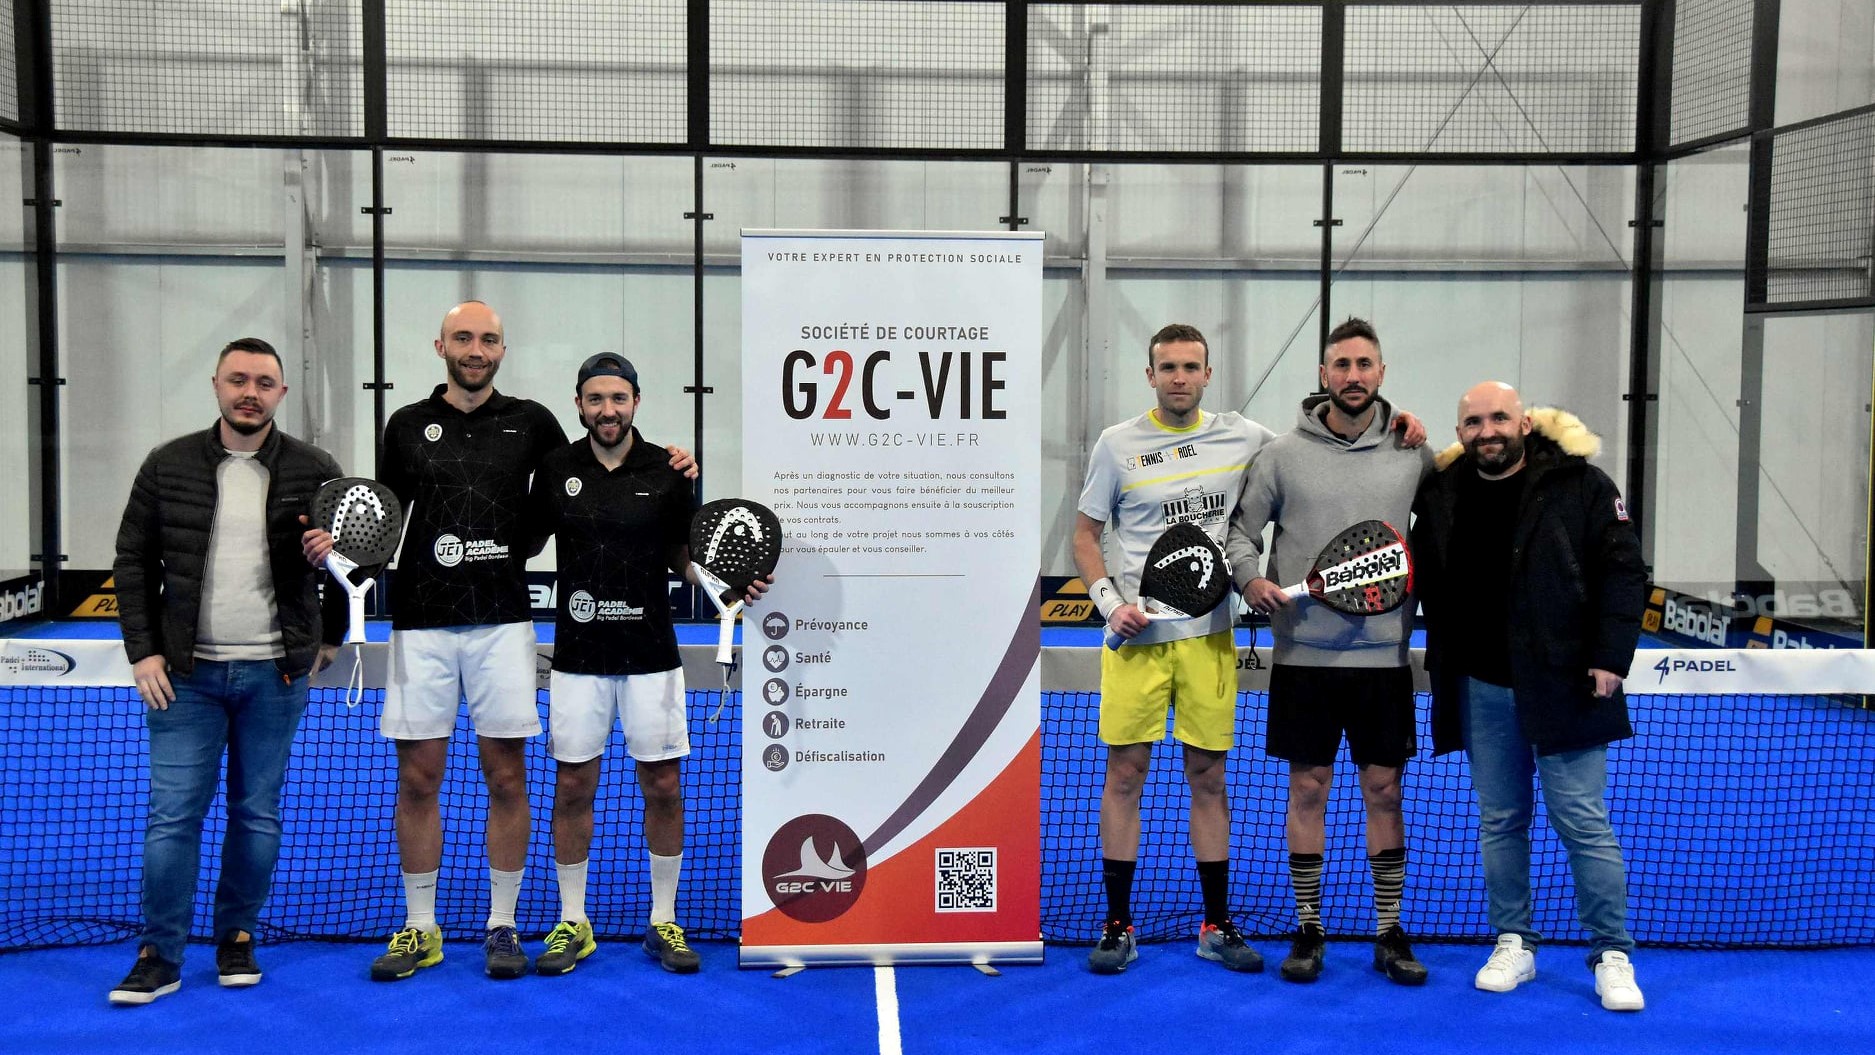 P1000 4Padel Dunkirk: another victory for Grué/Moreau!